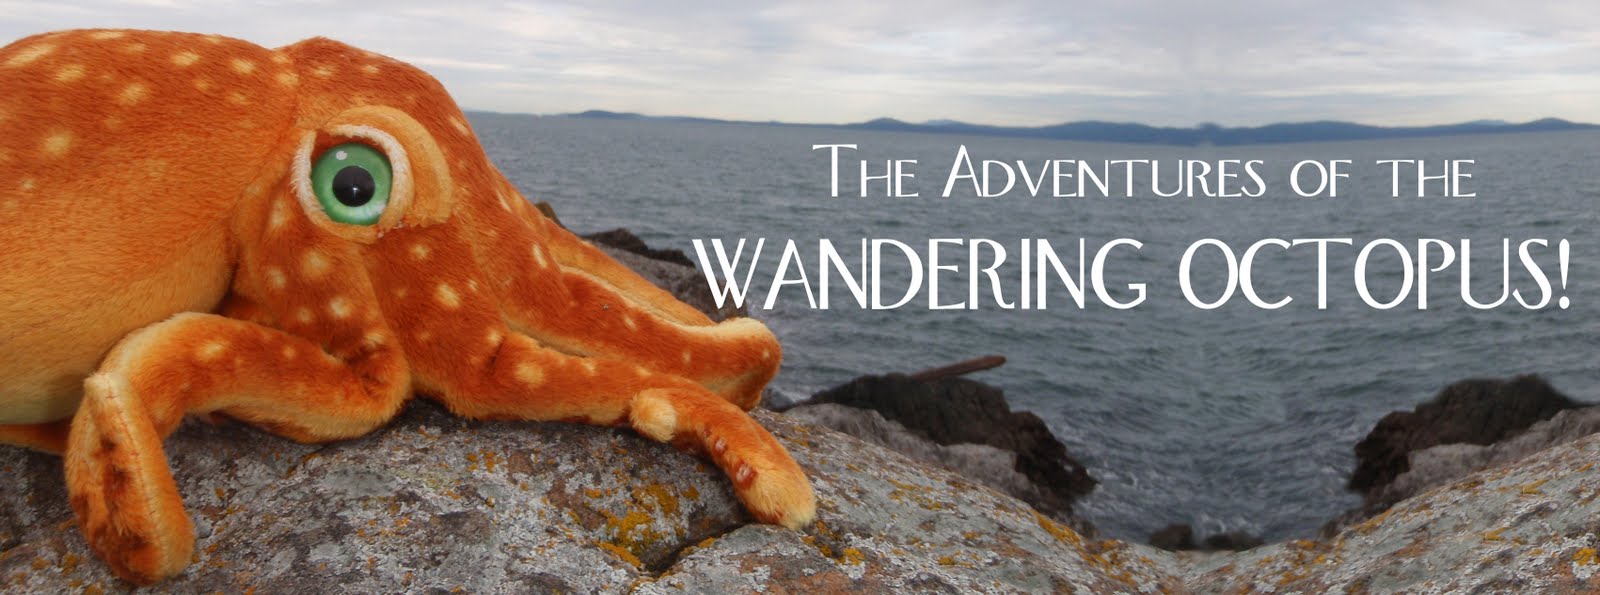 The Adventures of the Wandering Octopus